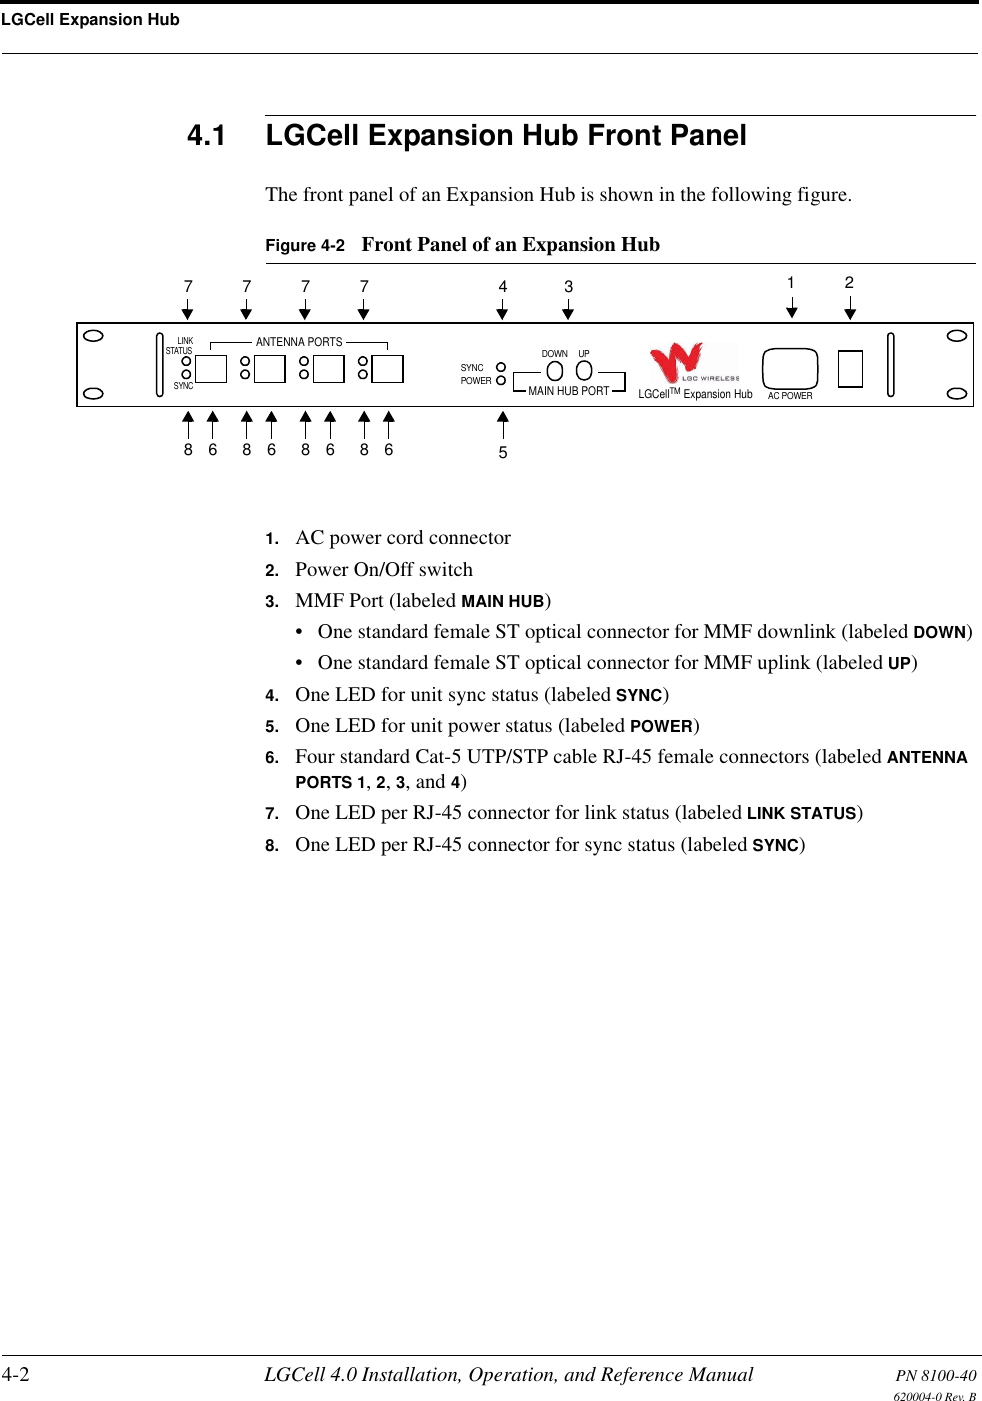 LGCell Expansion Hub4-2 LGCell 4.0 Installation, Operation, and Reference Manual PN 8100-40620004-0 Rev. B4.1 LGCell Expansion Hub Front PanelThe front panel of an Expansion Hub is shown in the following figure.Figure 4-2 Front Panel of an Expansion Hub1. AC power cord connector2. Power On/Off switch3. MMF Port (labeled MAIN HUB)• One standard female ST optical connector for MMF downlink (labeled DOWN)• One standard female ST optical connector for MMF uplink (labeled UP)4. One LED for unit sync status (labeled SYNC)5. One LED for unit power status (labeled POWER)6. Four standard Cat-5 UTP/STP cable RJ-45 female connectors (labeled ANTENNA PORTS 1, 2, 3, and 4) 7. One LED per RJ-45 connector for link status (labeled LINK STATUS)8. One LED per RJ-45 connector for sync status (labeled SYNC)1 2356AC POWERLGCellTM Expansion HubSYNCPOWERSYNCLINKSTATUSANTENNA PORTSDOWN UPMAIN HUB PORT487687687687